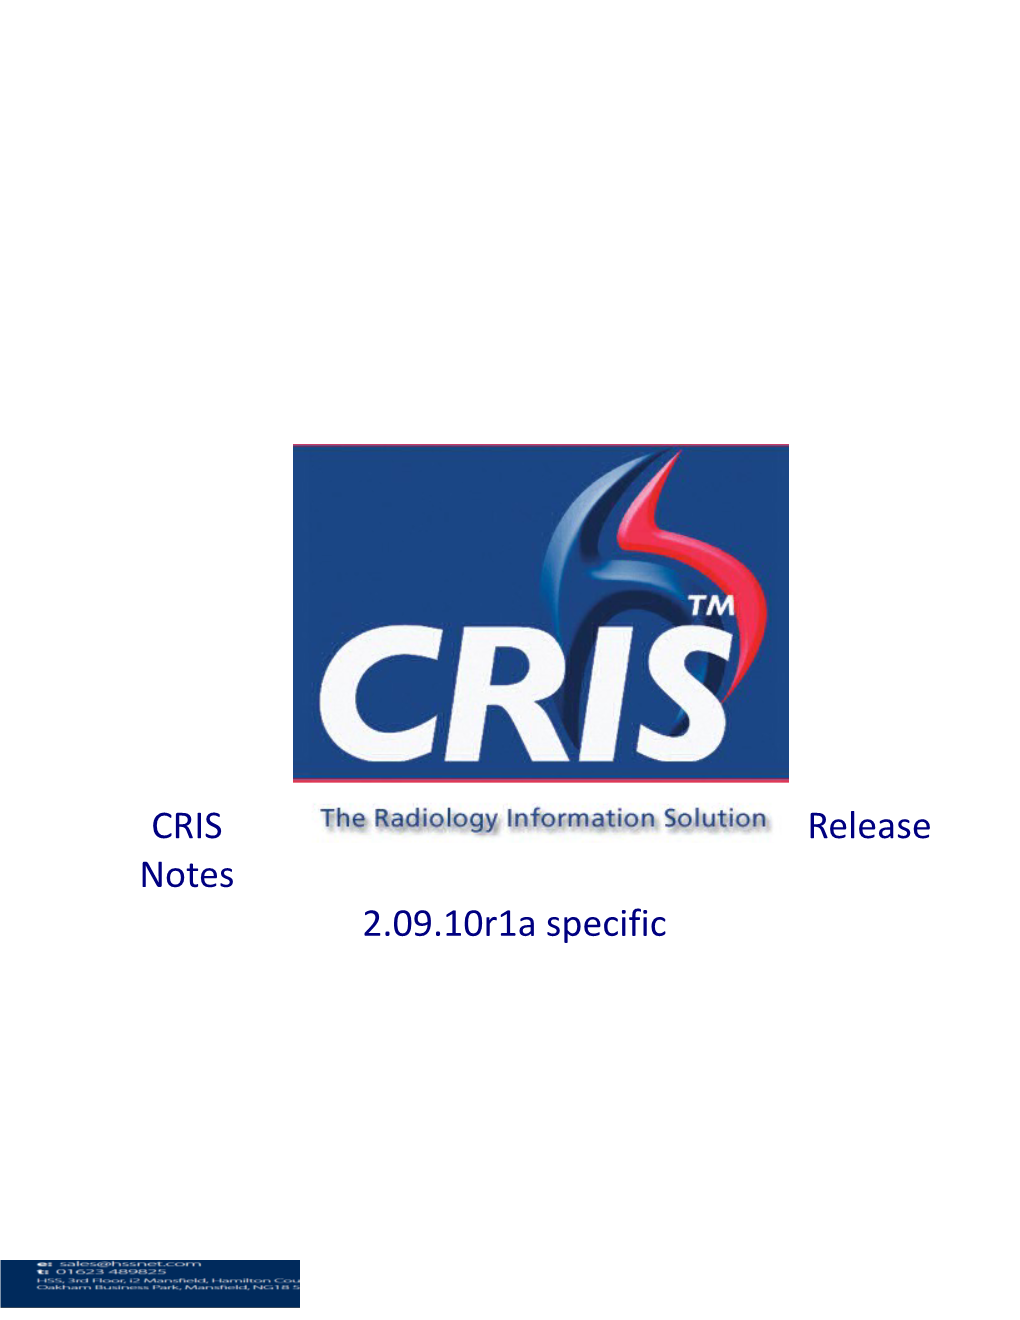 CRIS Release Notes 2.09.10R1a Specific